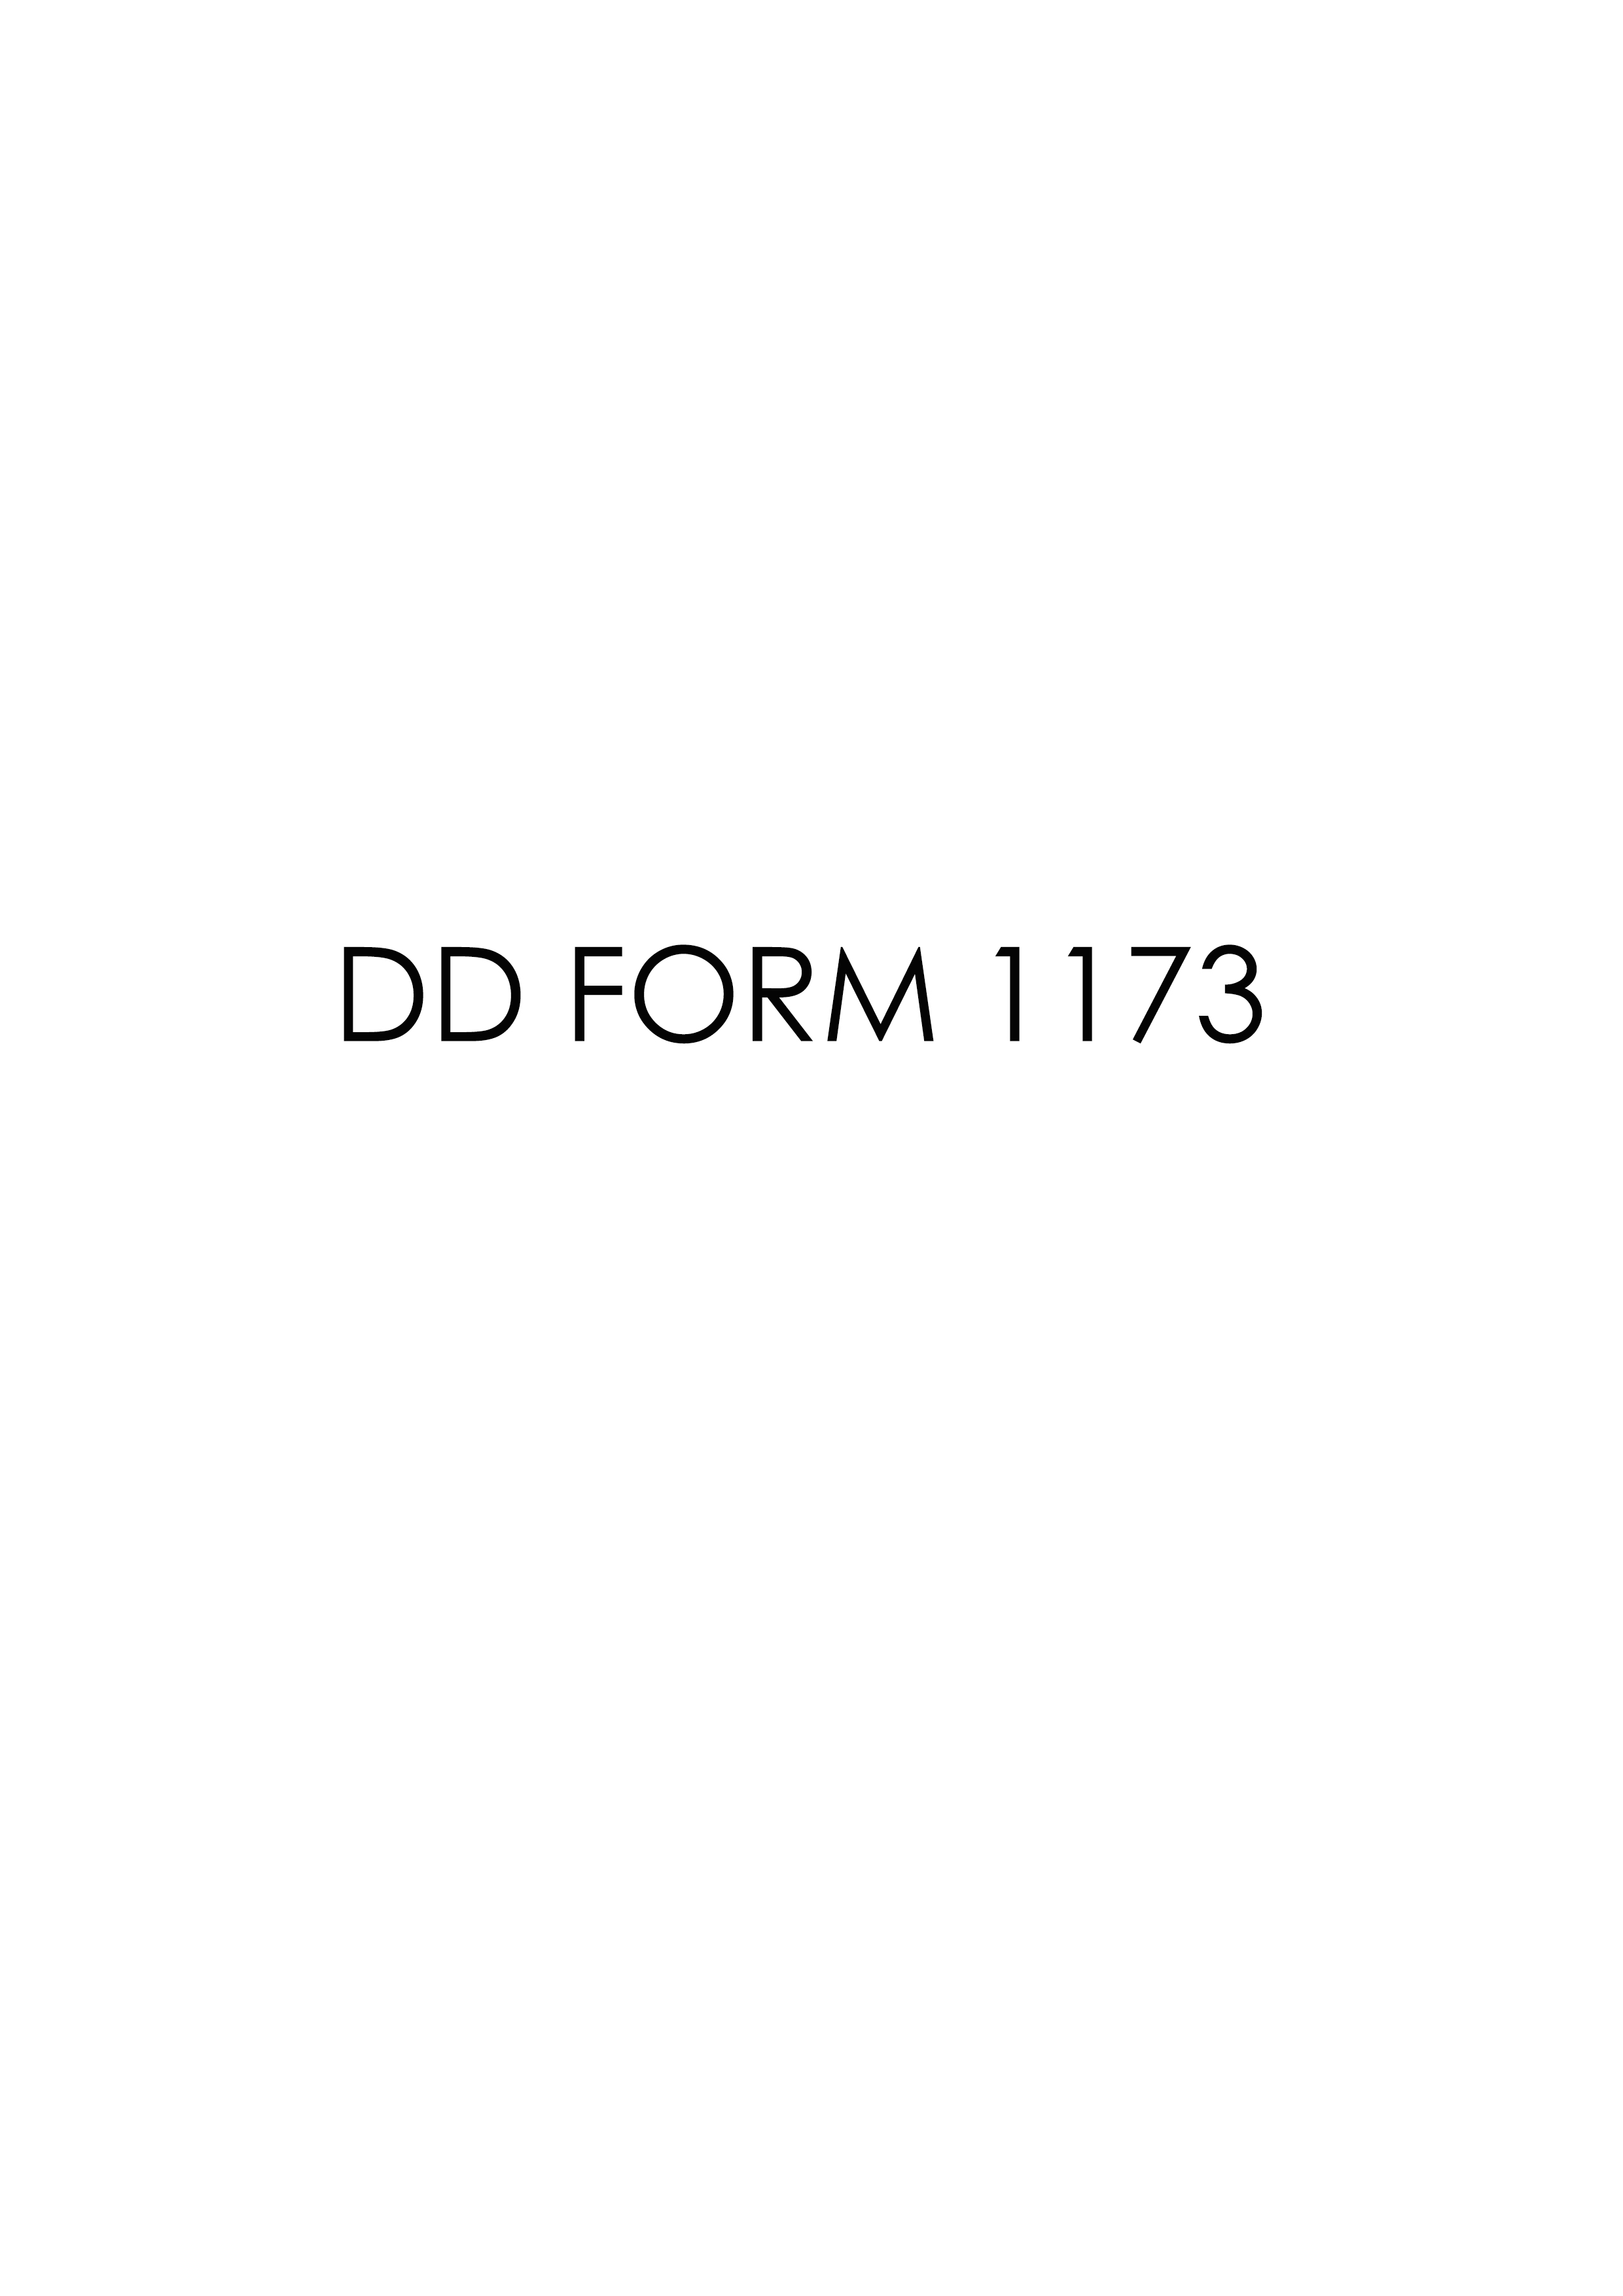 Download Fillable dd Form 1173